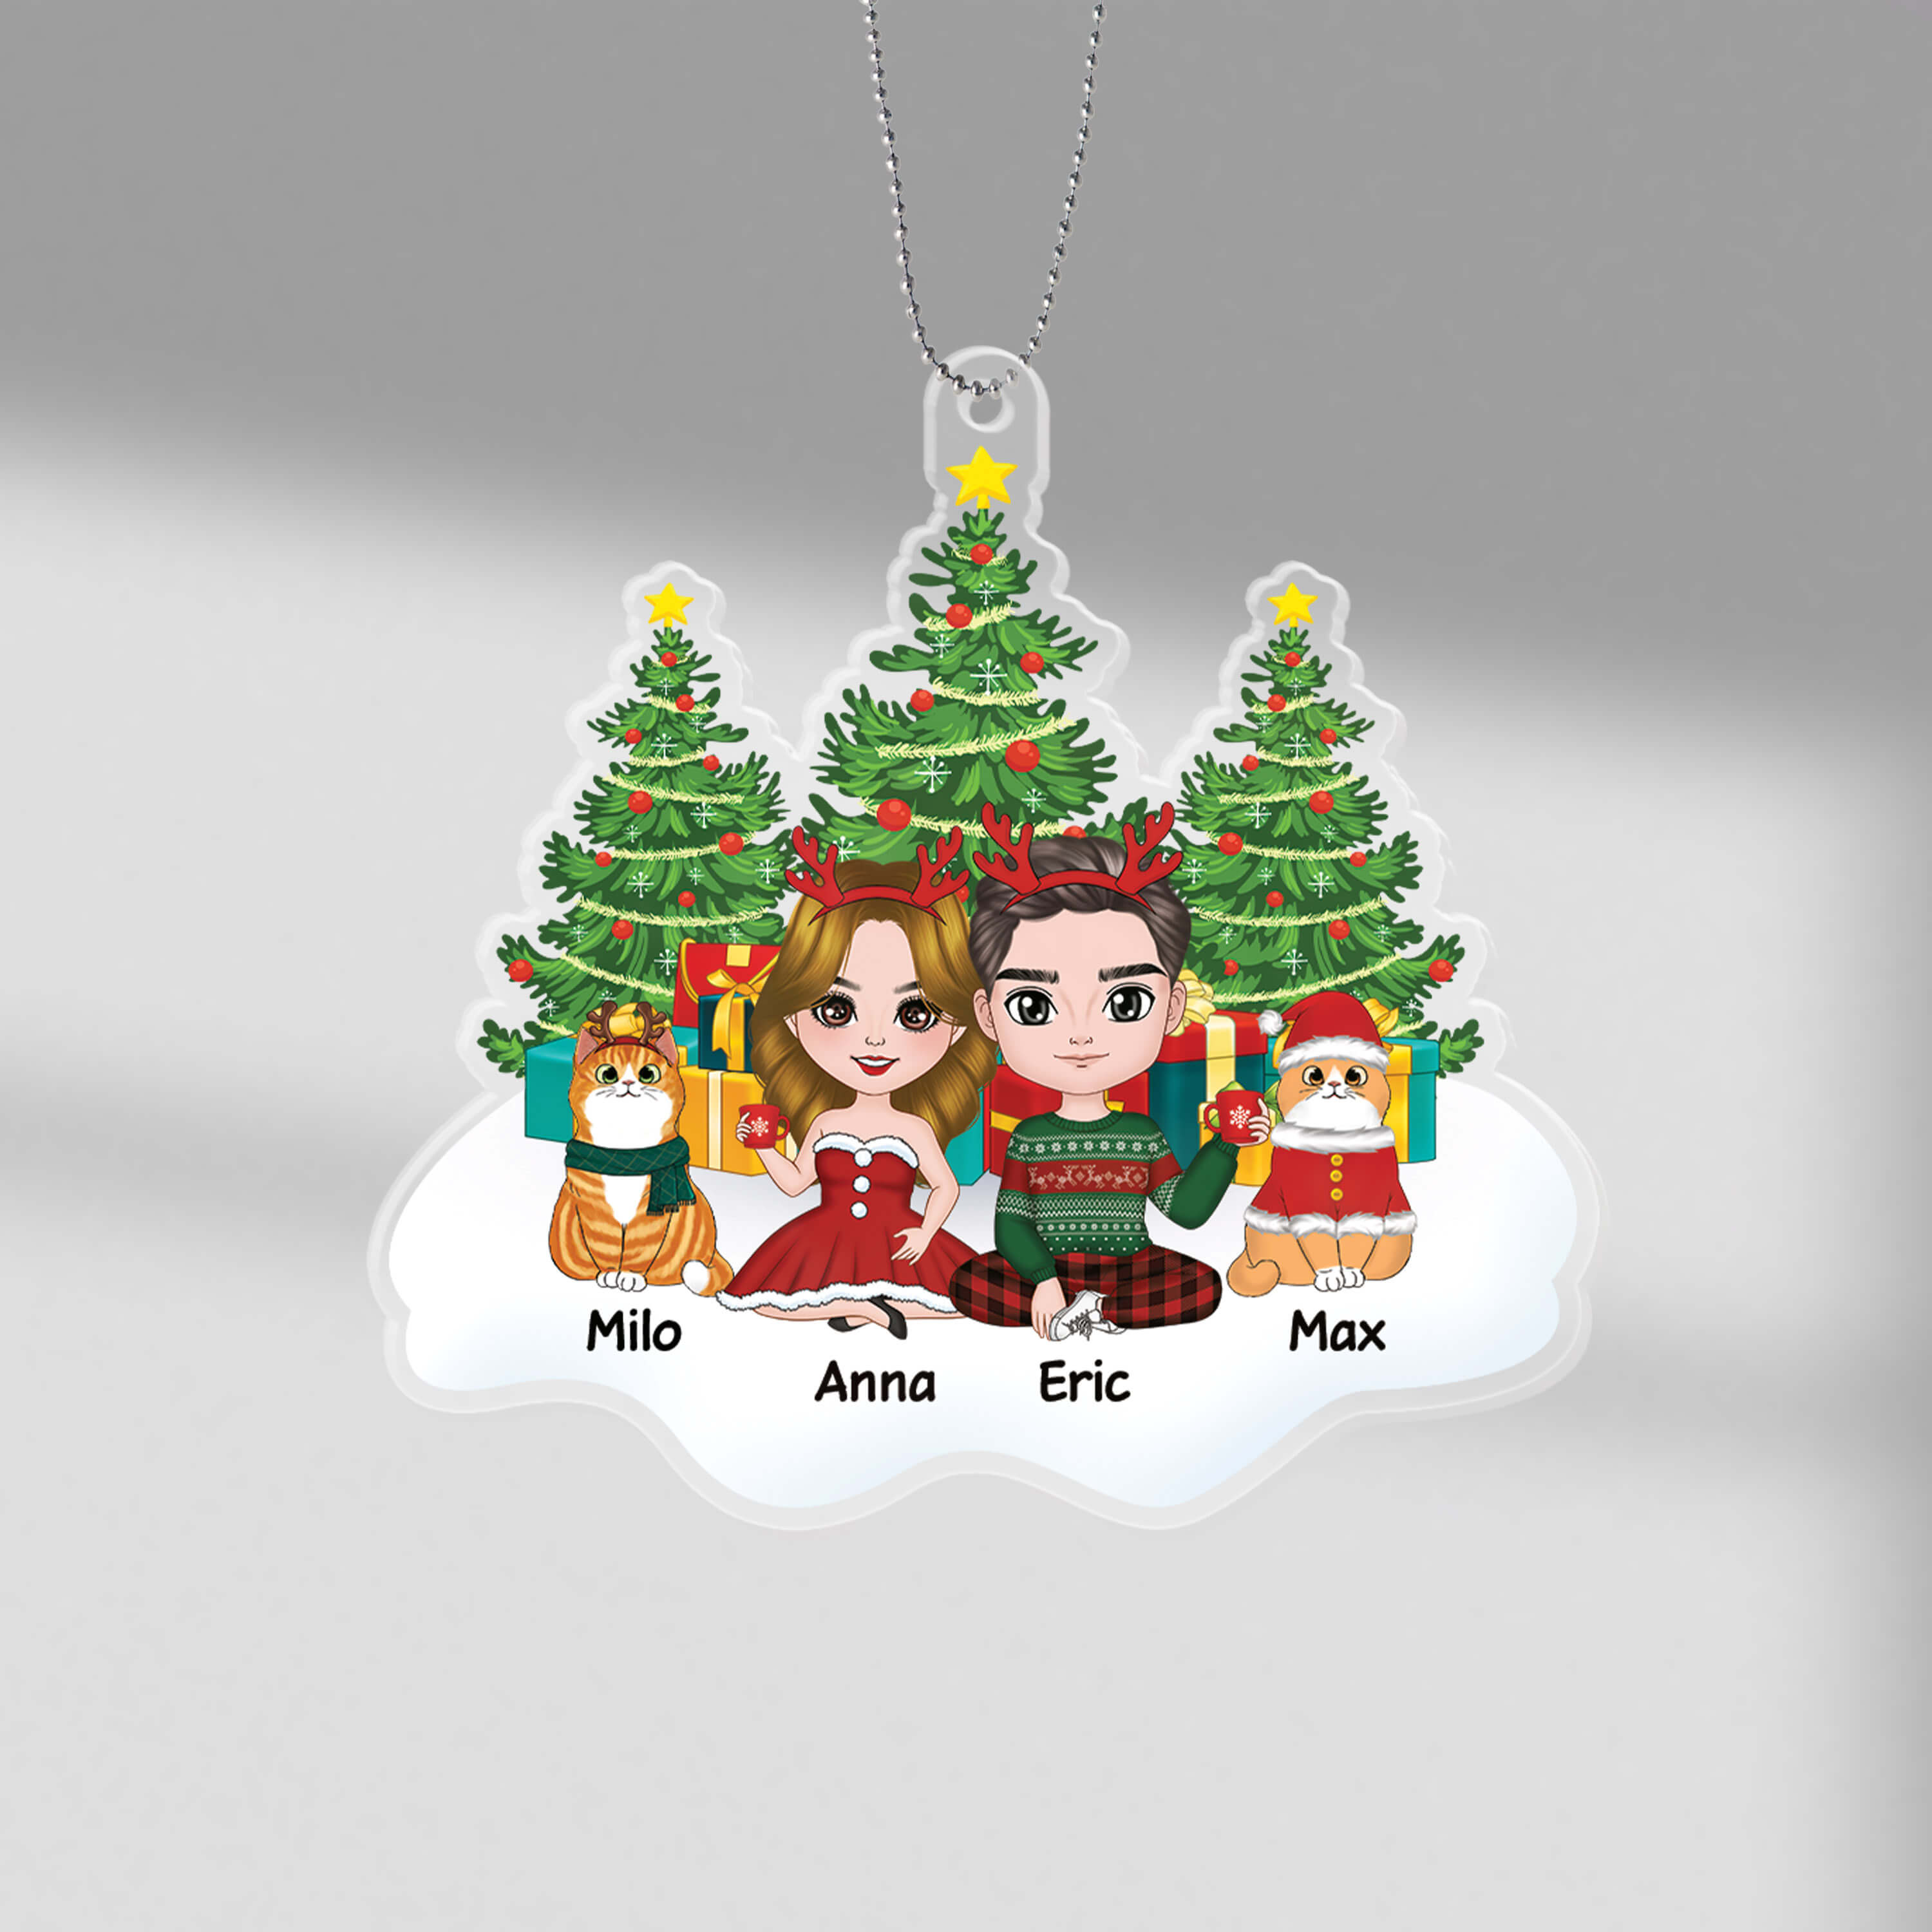 https://personalhouse.com/cdn/shop/files/1406OUS1-personalized-couple-and-cats-sitting-on-snow-christmas-tree-ornament.jpg?v=1697426593